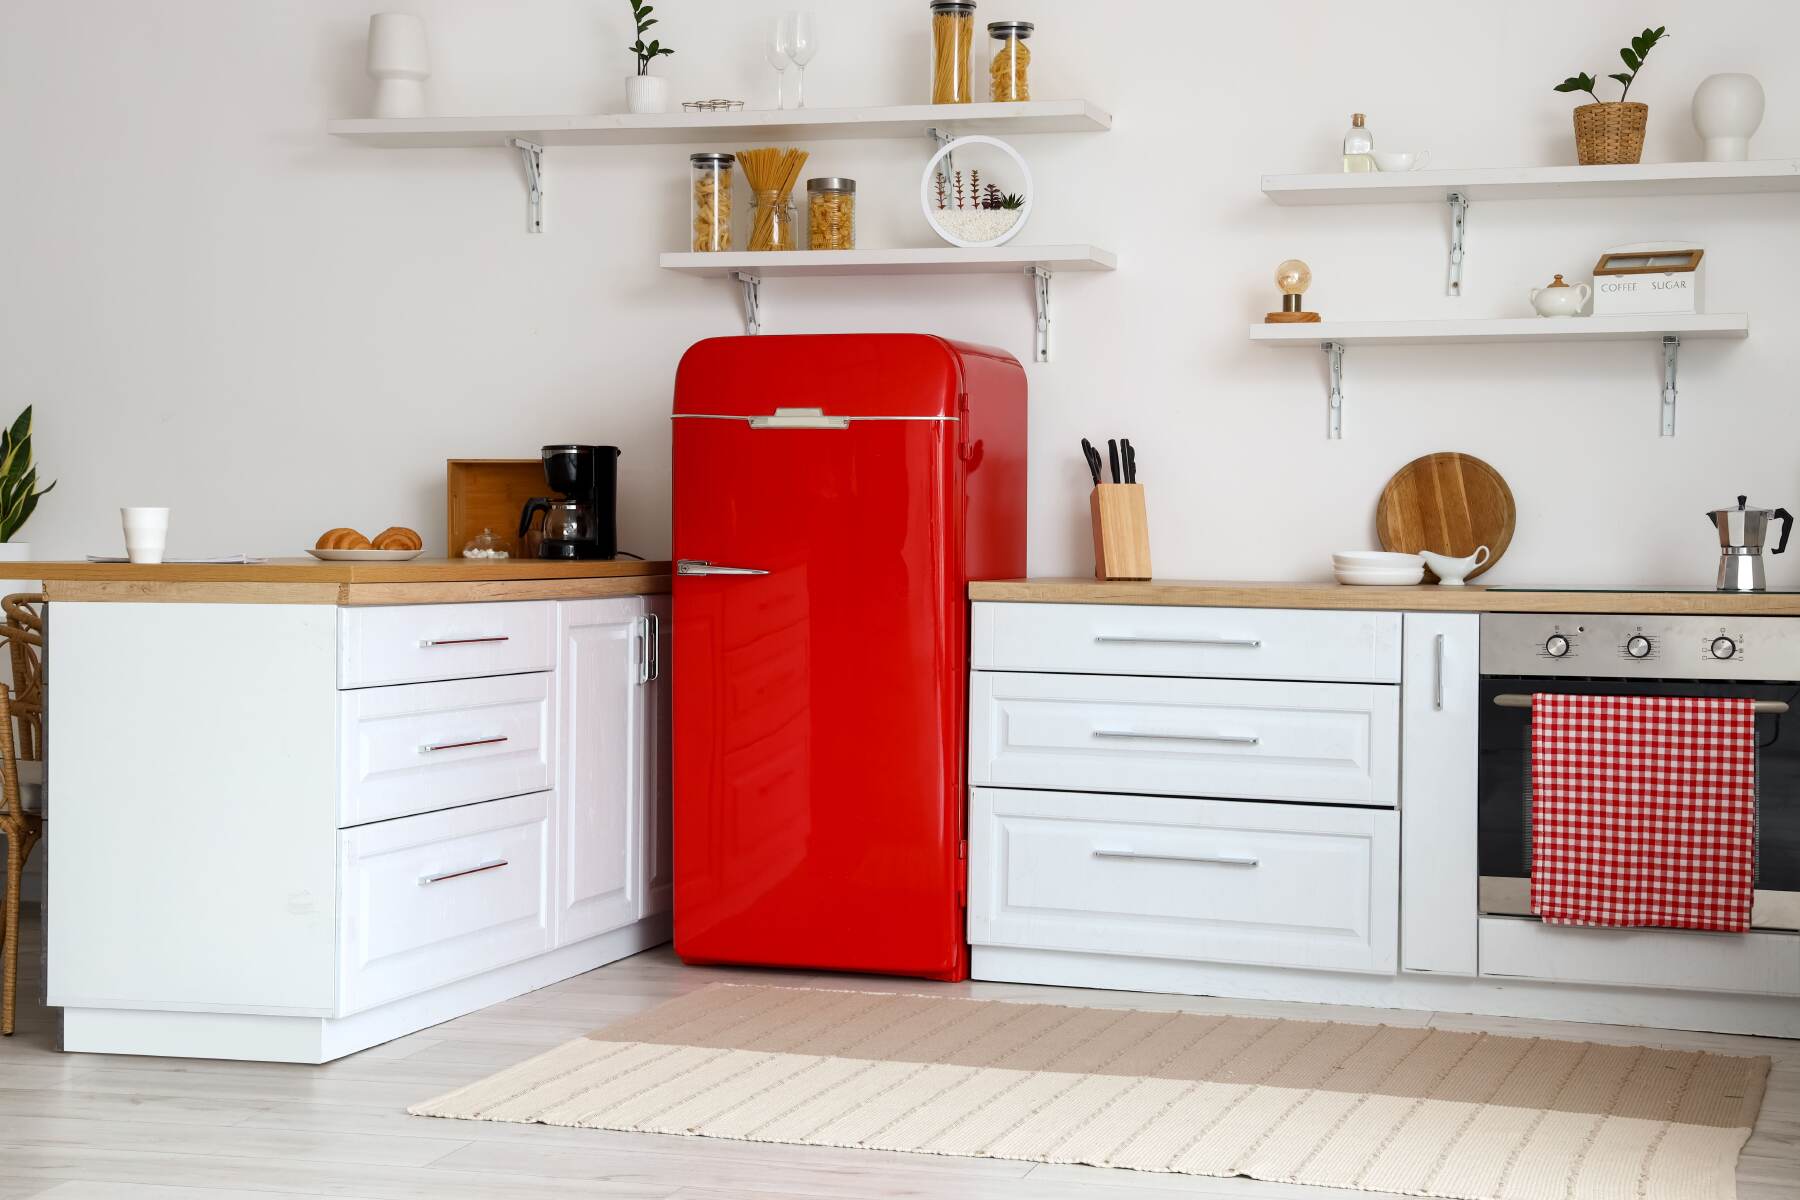 kitchen with white counters and red fridge